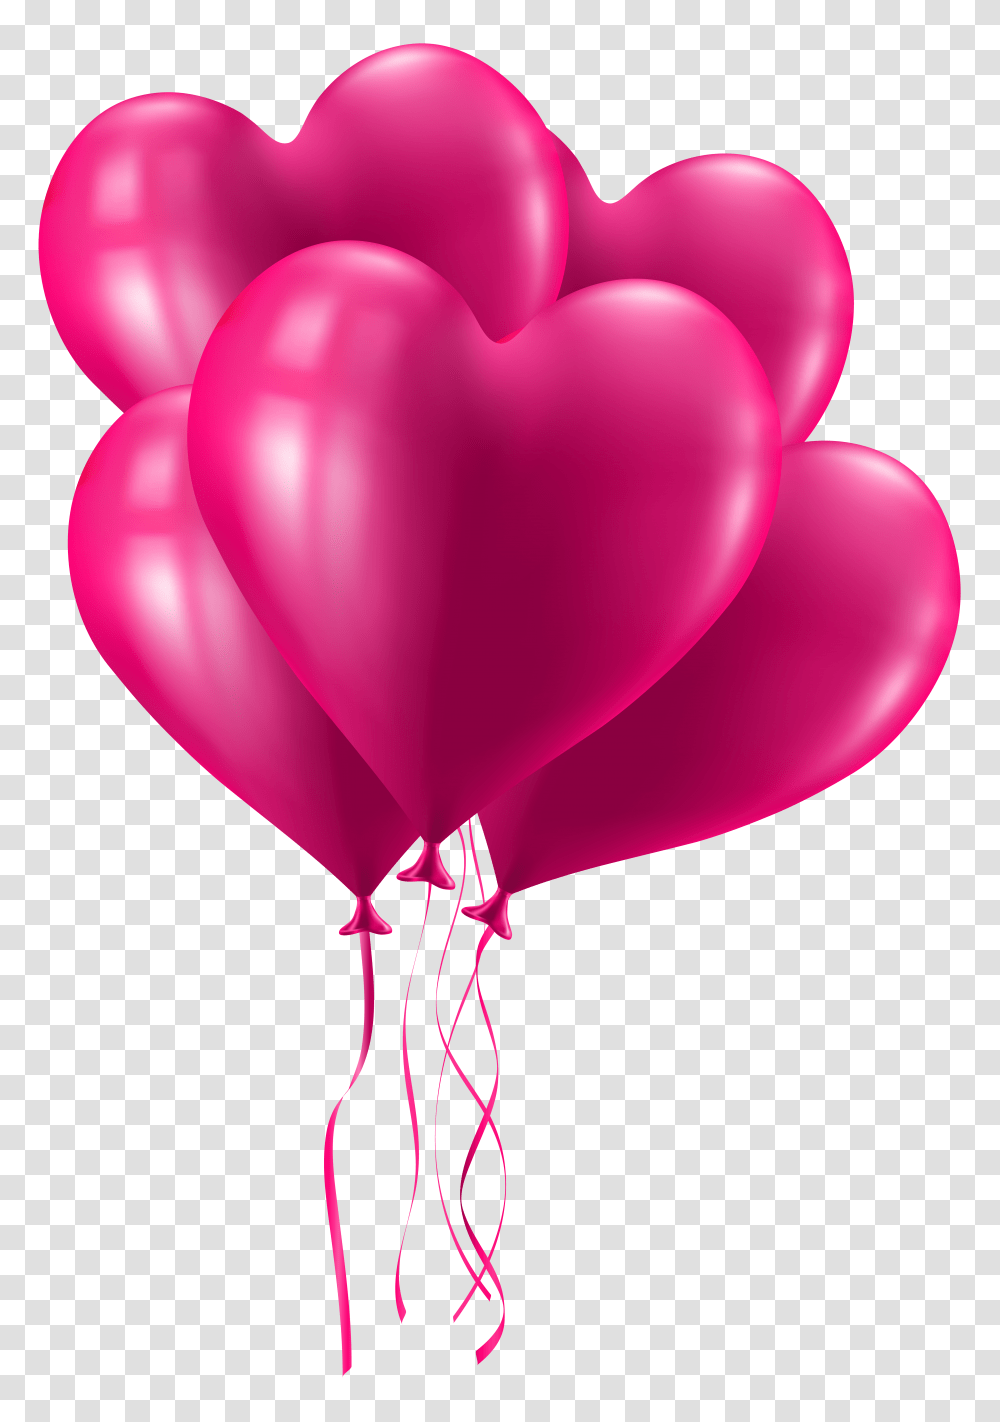 Valentines Day Pink Heart Balloons Clip Art Gallery Transparent Png